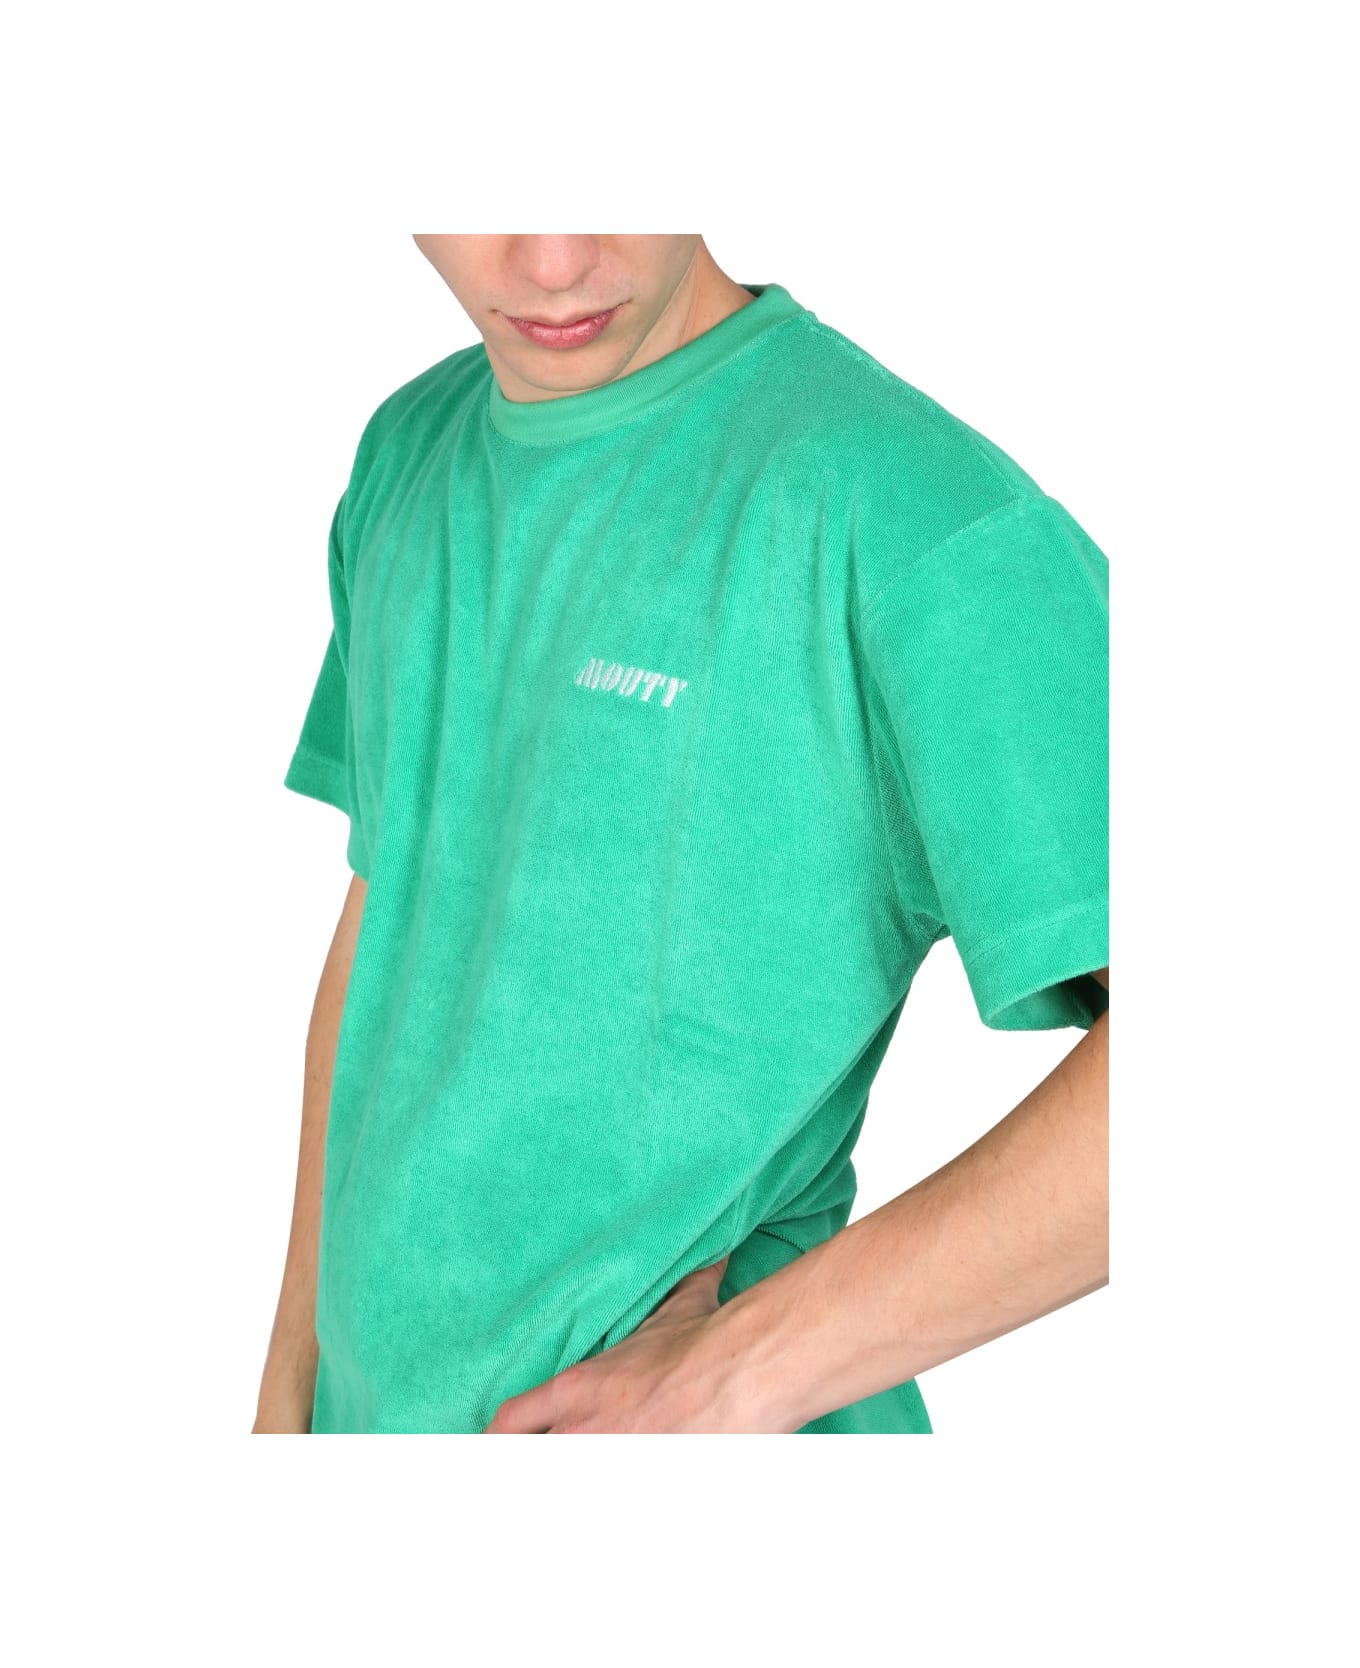 Mouty "terry" T-shirt - GREEN シャツ